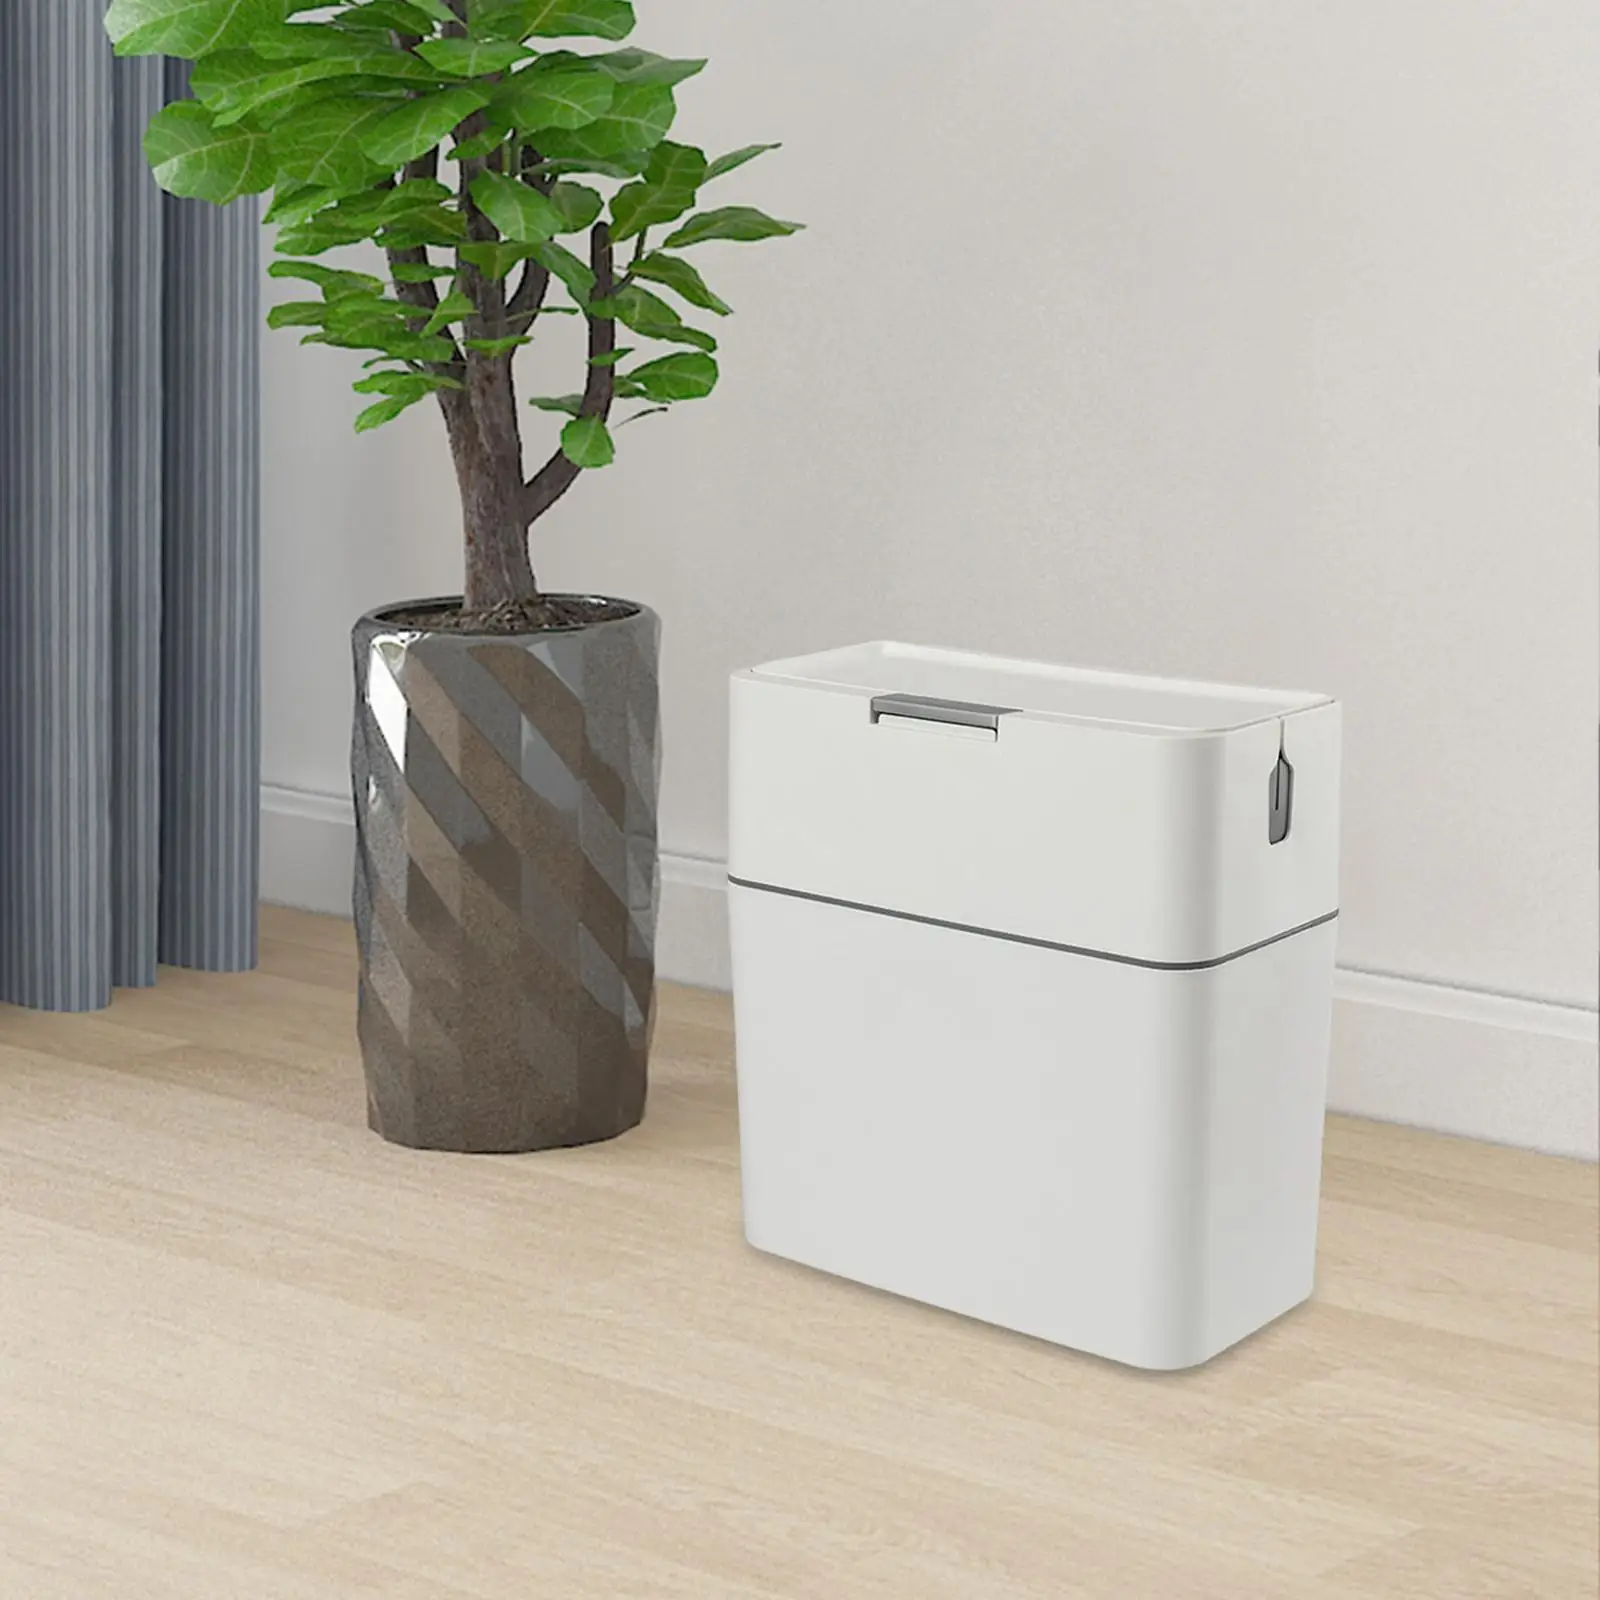 Trash Can Wastebasket with Brush 12L Storage Bucket Garbage Container Bin for Indoor